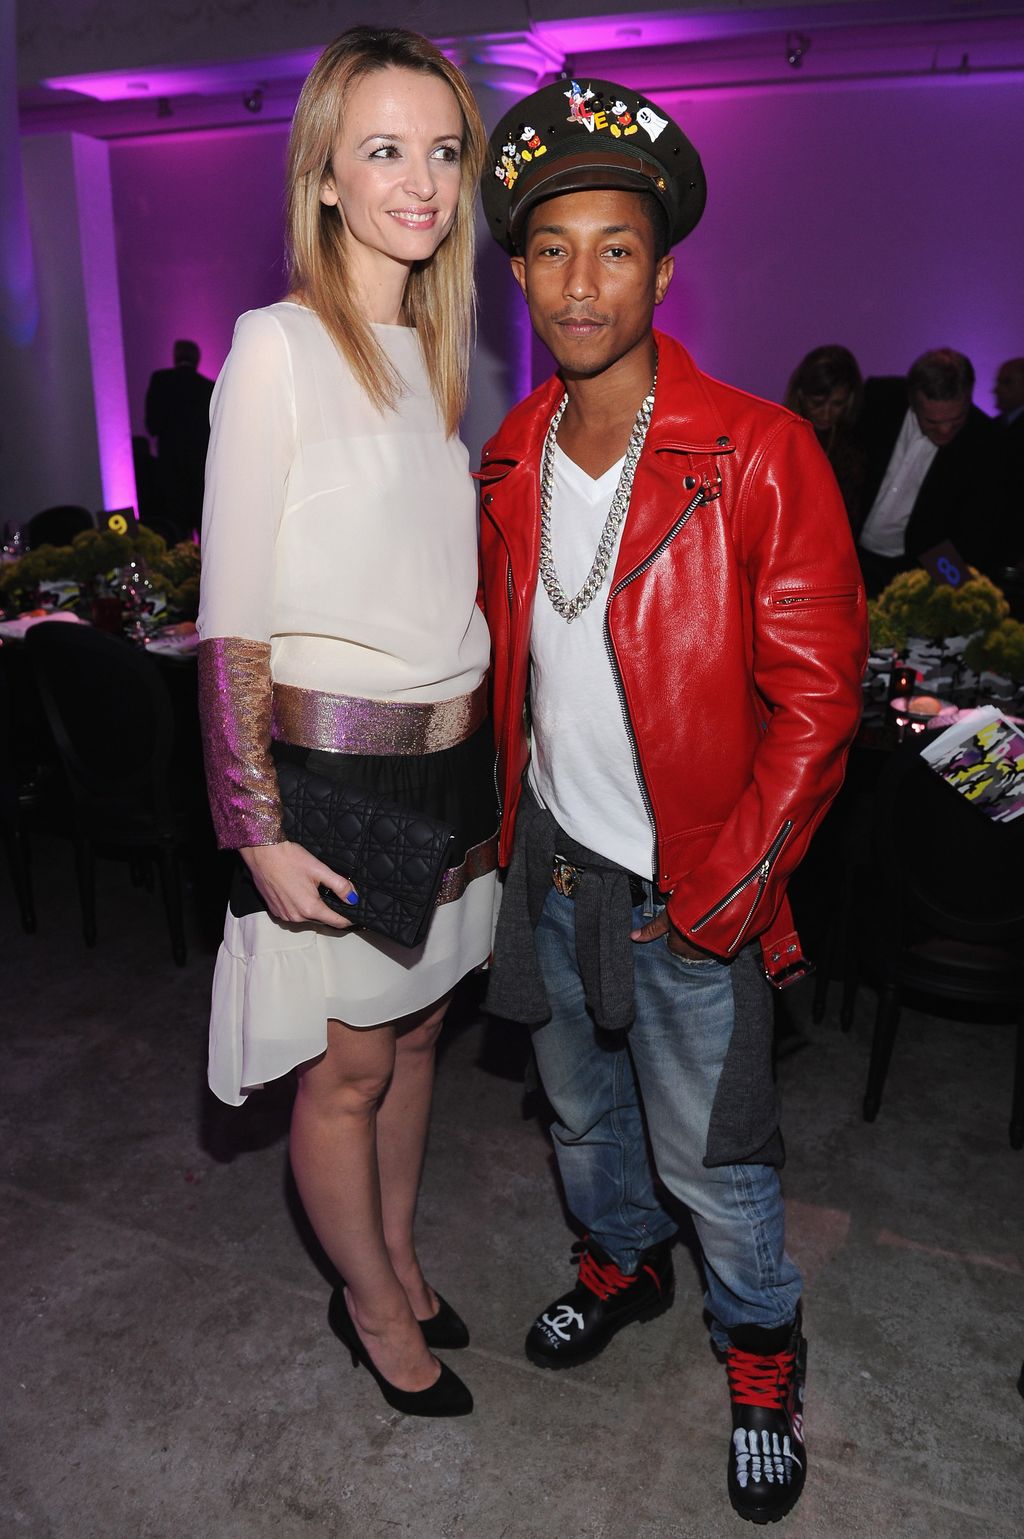 MIAMI, FL - NOVEMBER 29:  Delphine Arnault and musician Pharrell Williams attend the Dior pop-up shop featuring Anselm Reyle for Dior at Miami Design District on November 29, 2011 in Miami City.  (Photo by Dimitrios Kambouris/Getty Images for Dior)